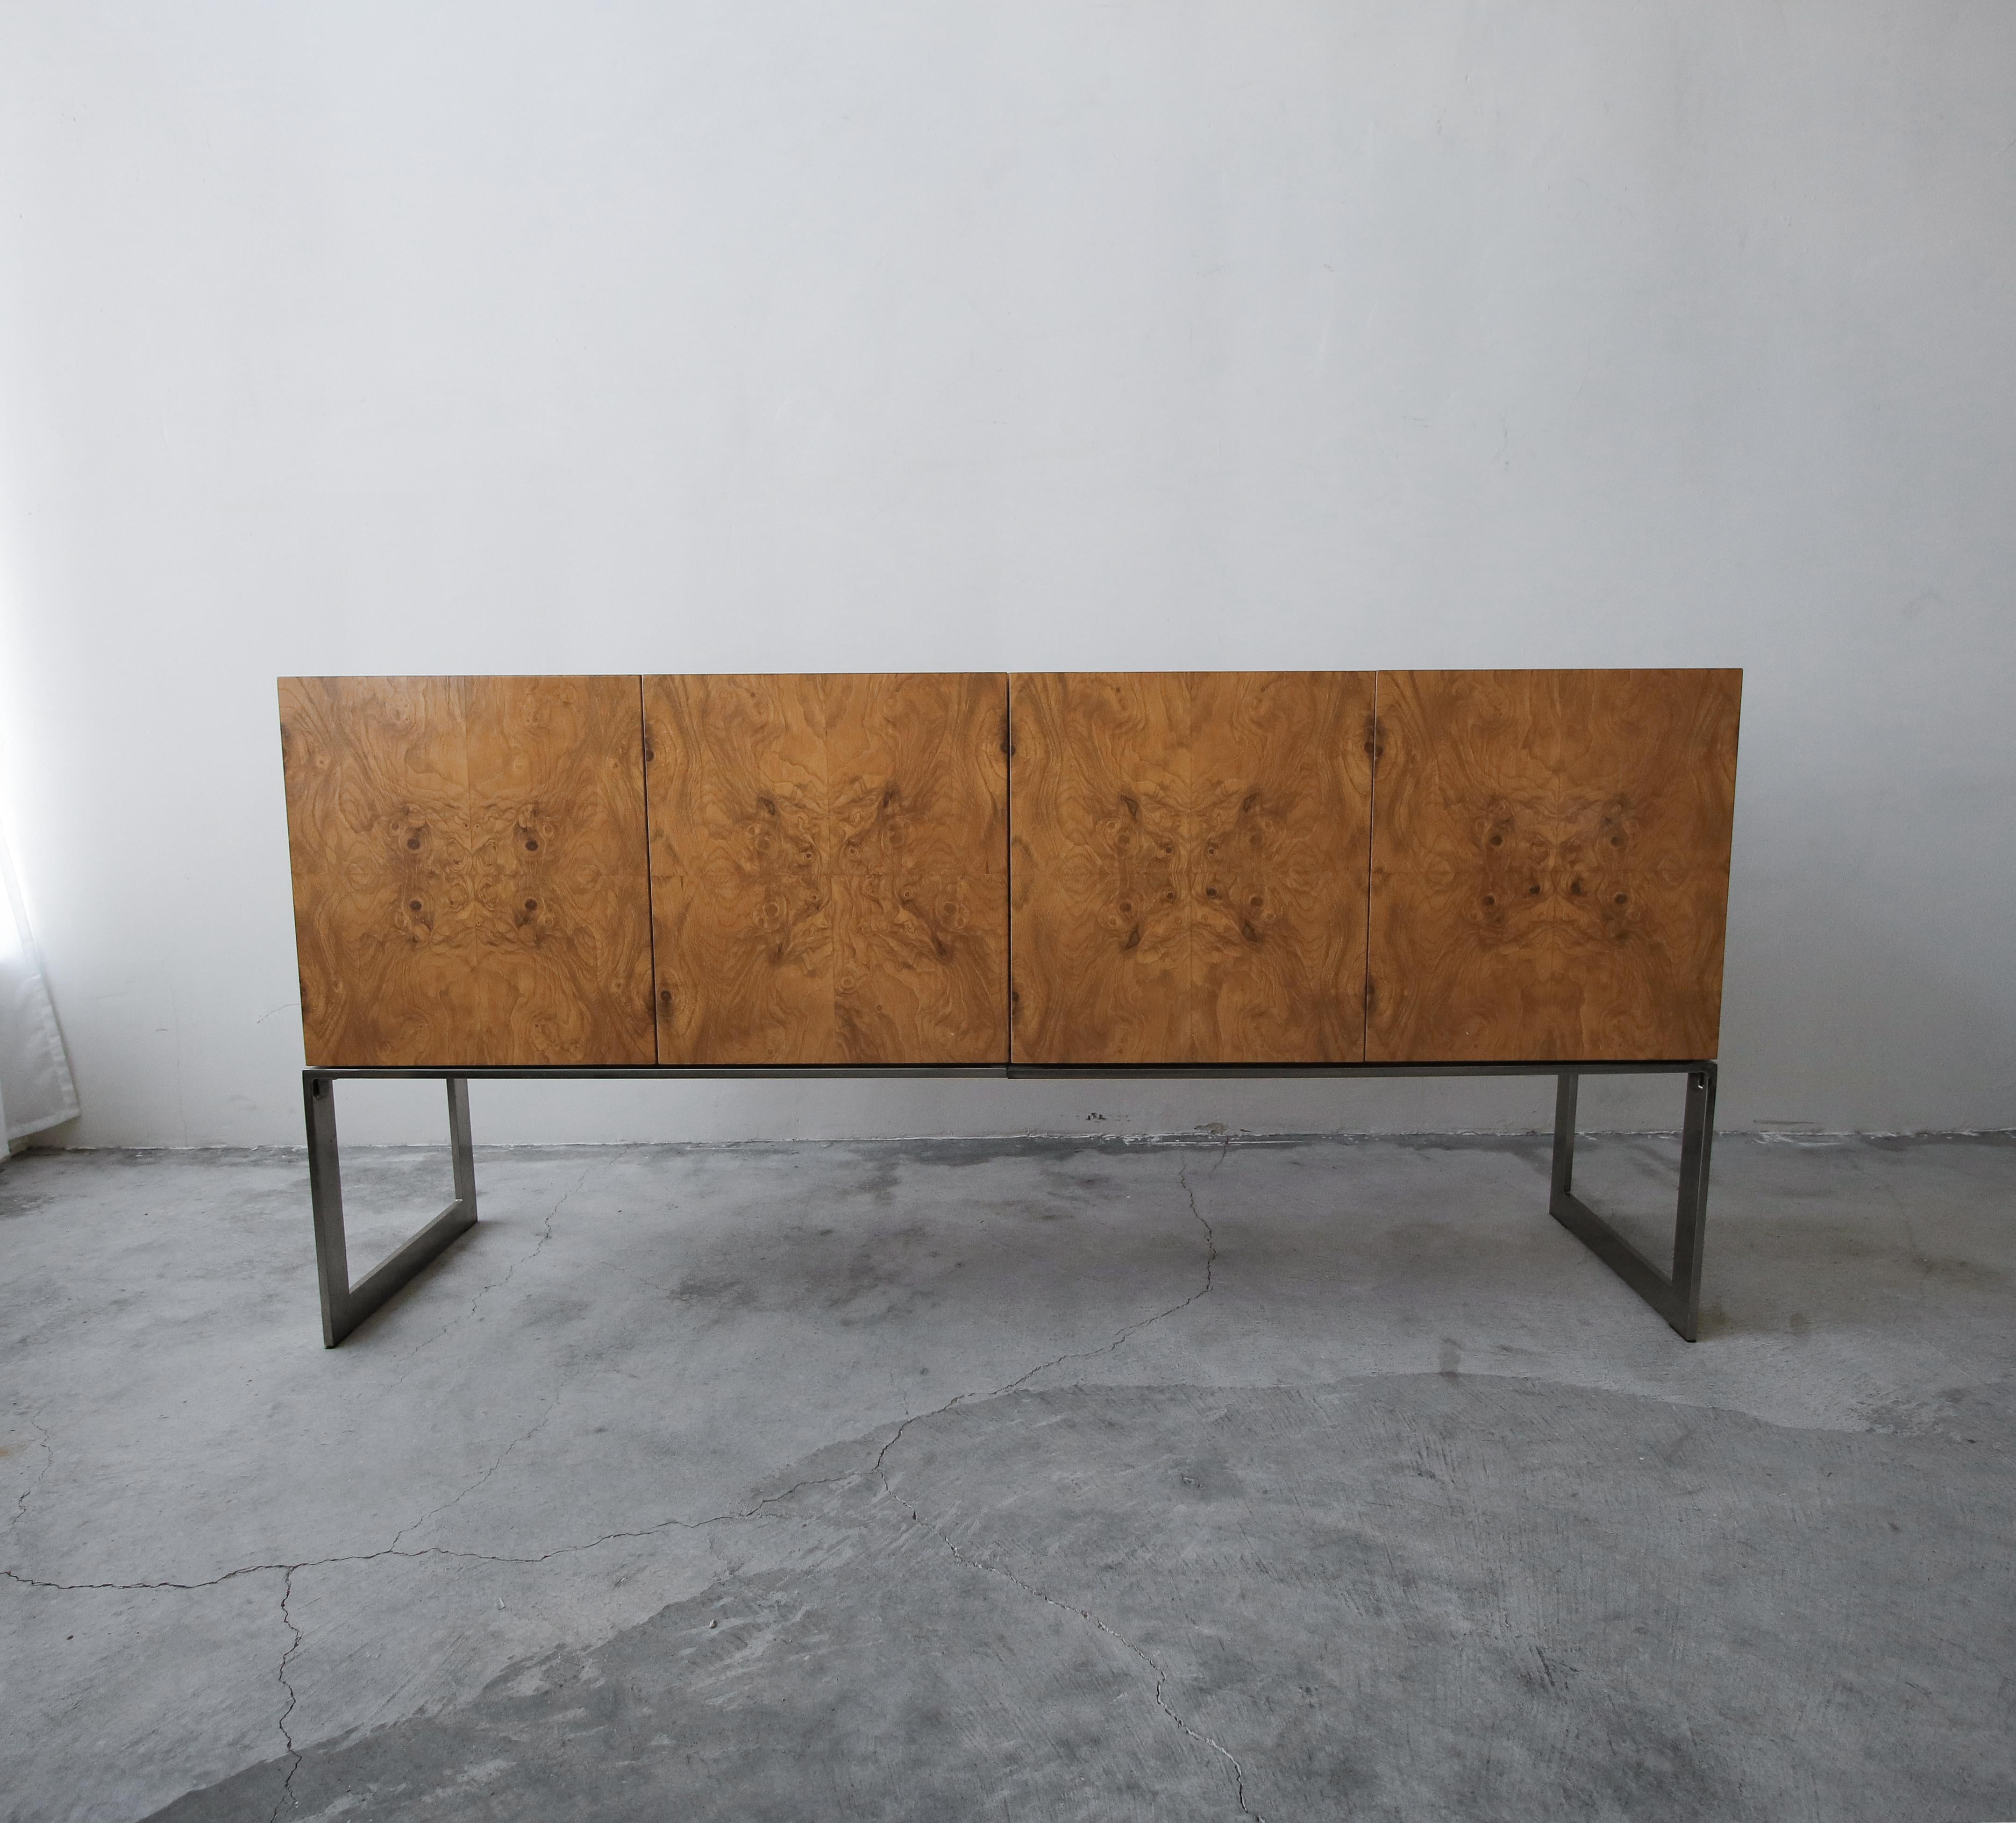 Stunning maple burl credenza on a chrome base designed by Milo Baughman for Thayer Coggin. A beautiful credenza, with beautiful book-matched grain.

The credenza is in excellent condition overall, the exterior has no imperfections to be noted. The